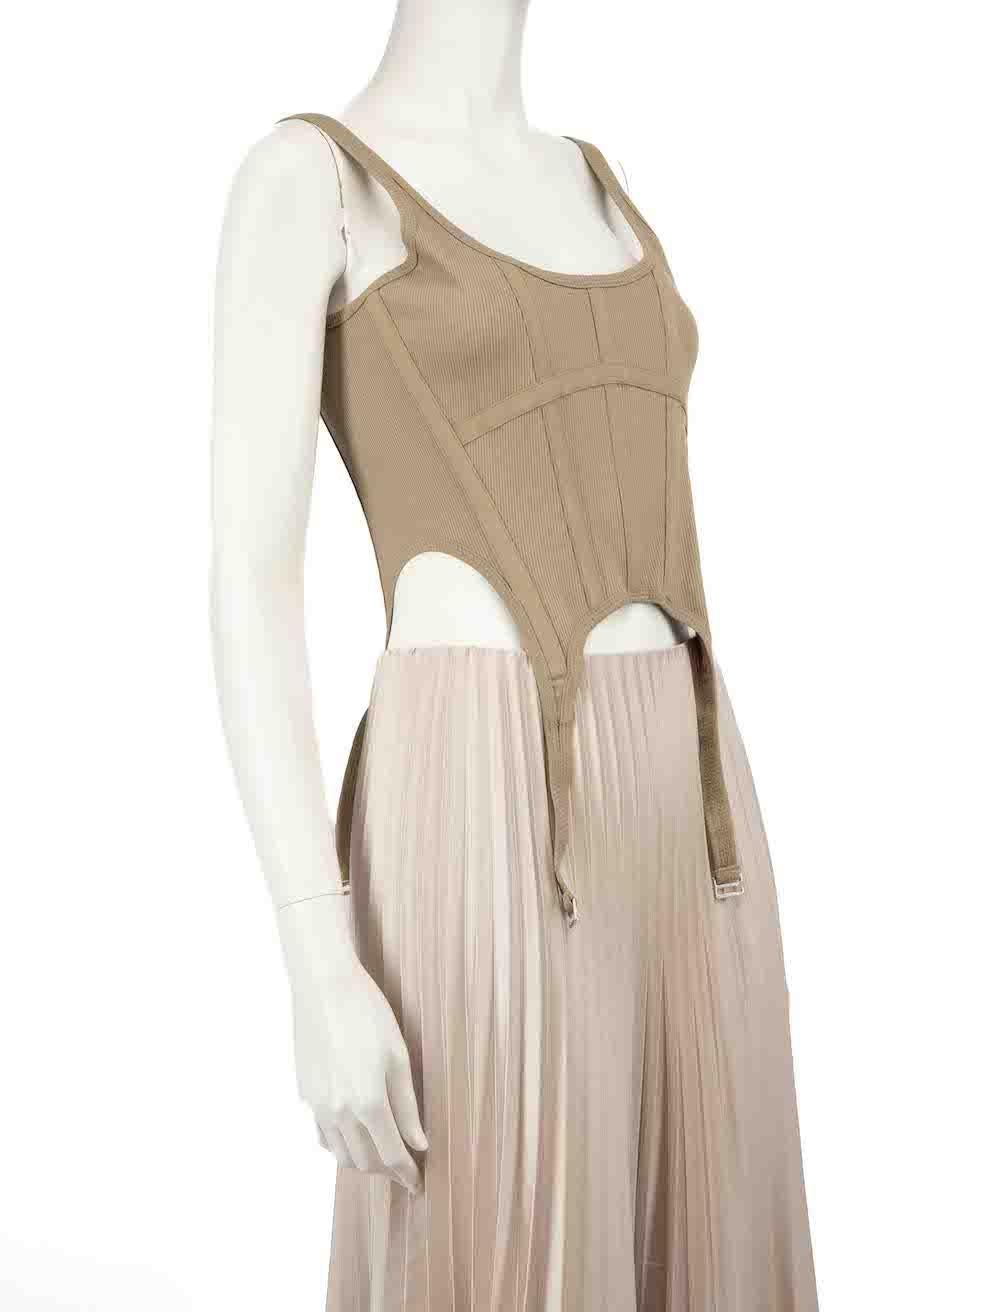 CONDITION is Never worn. No visible wear to top is evident on this new Dion Lee designer resale item.
 
 
 
 Details
 
 
 Khaki
 
 Cotton
 
 Tank top
 
 Ribbed and stretchy
 
 Boning corset accent
 
 Strap detail on hem
 
 Scoop neckline
 
 Cropped